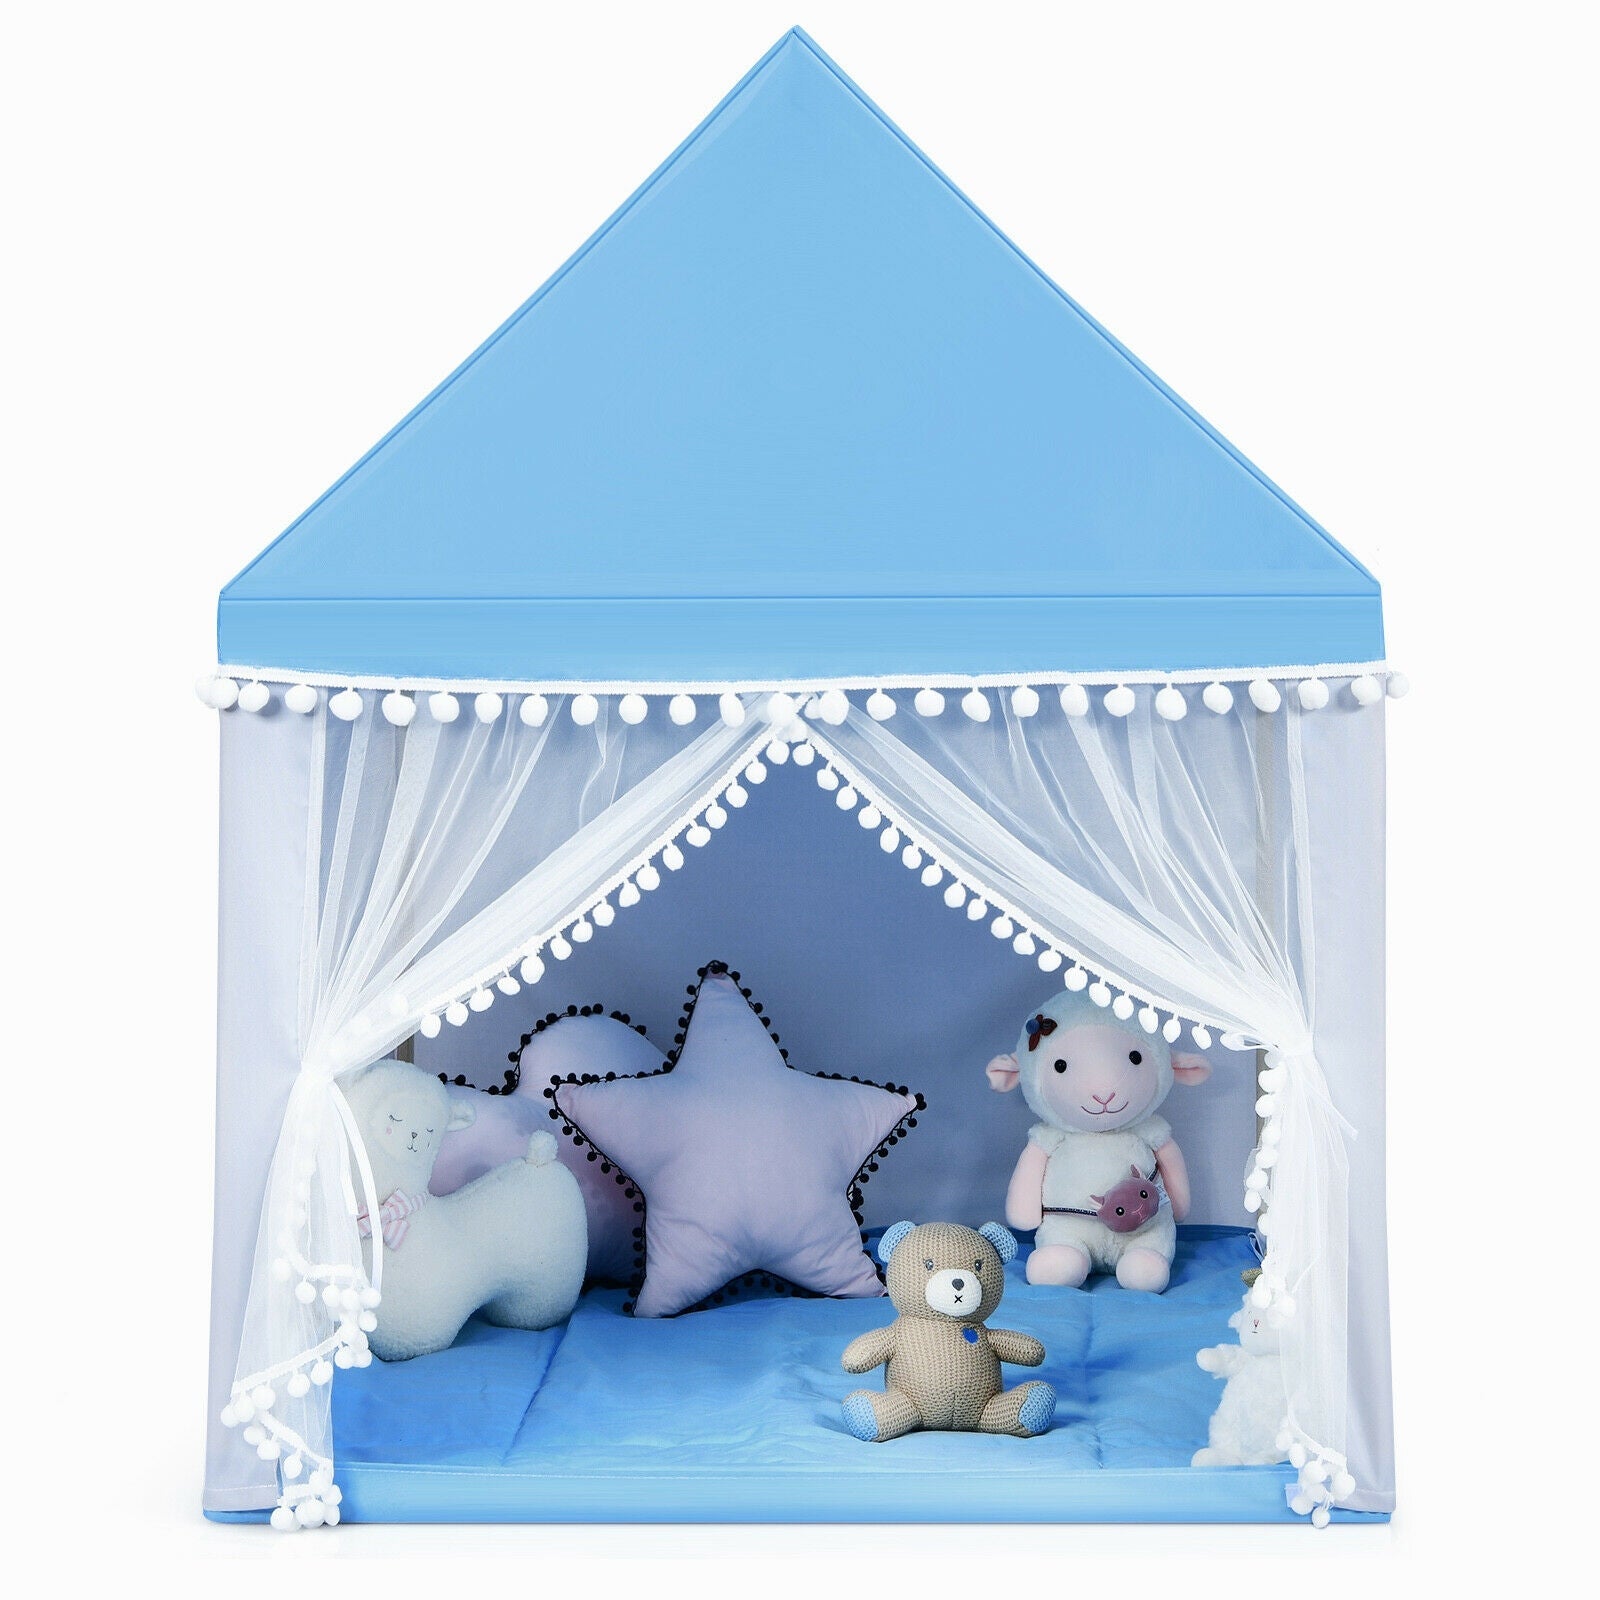 Portable Play Tent Large Playhouse Castle Fairy Tent Gift with Mat for Kids